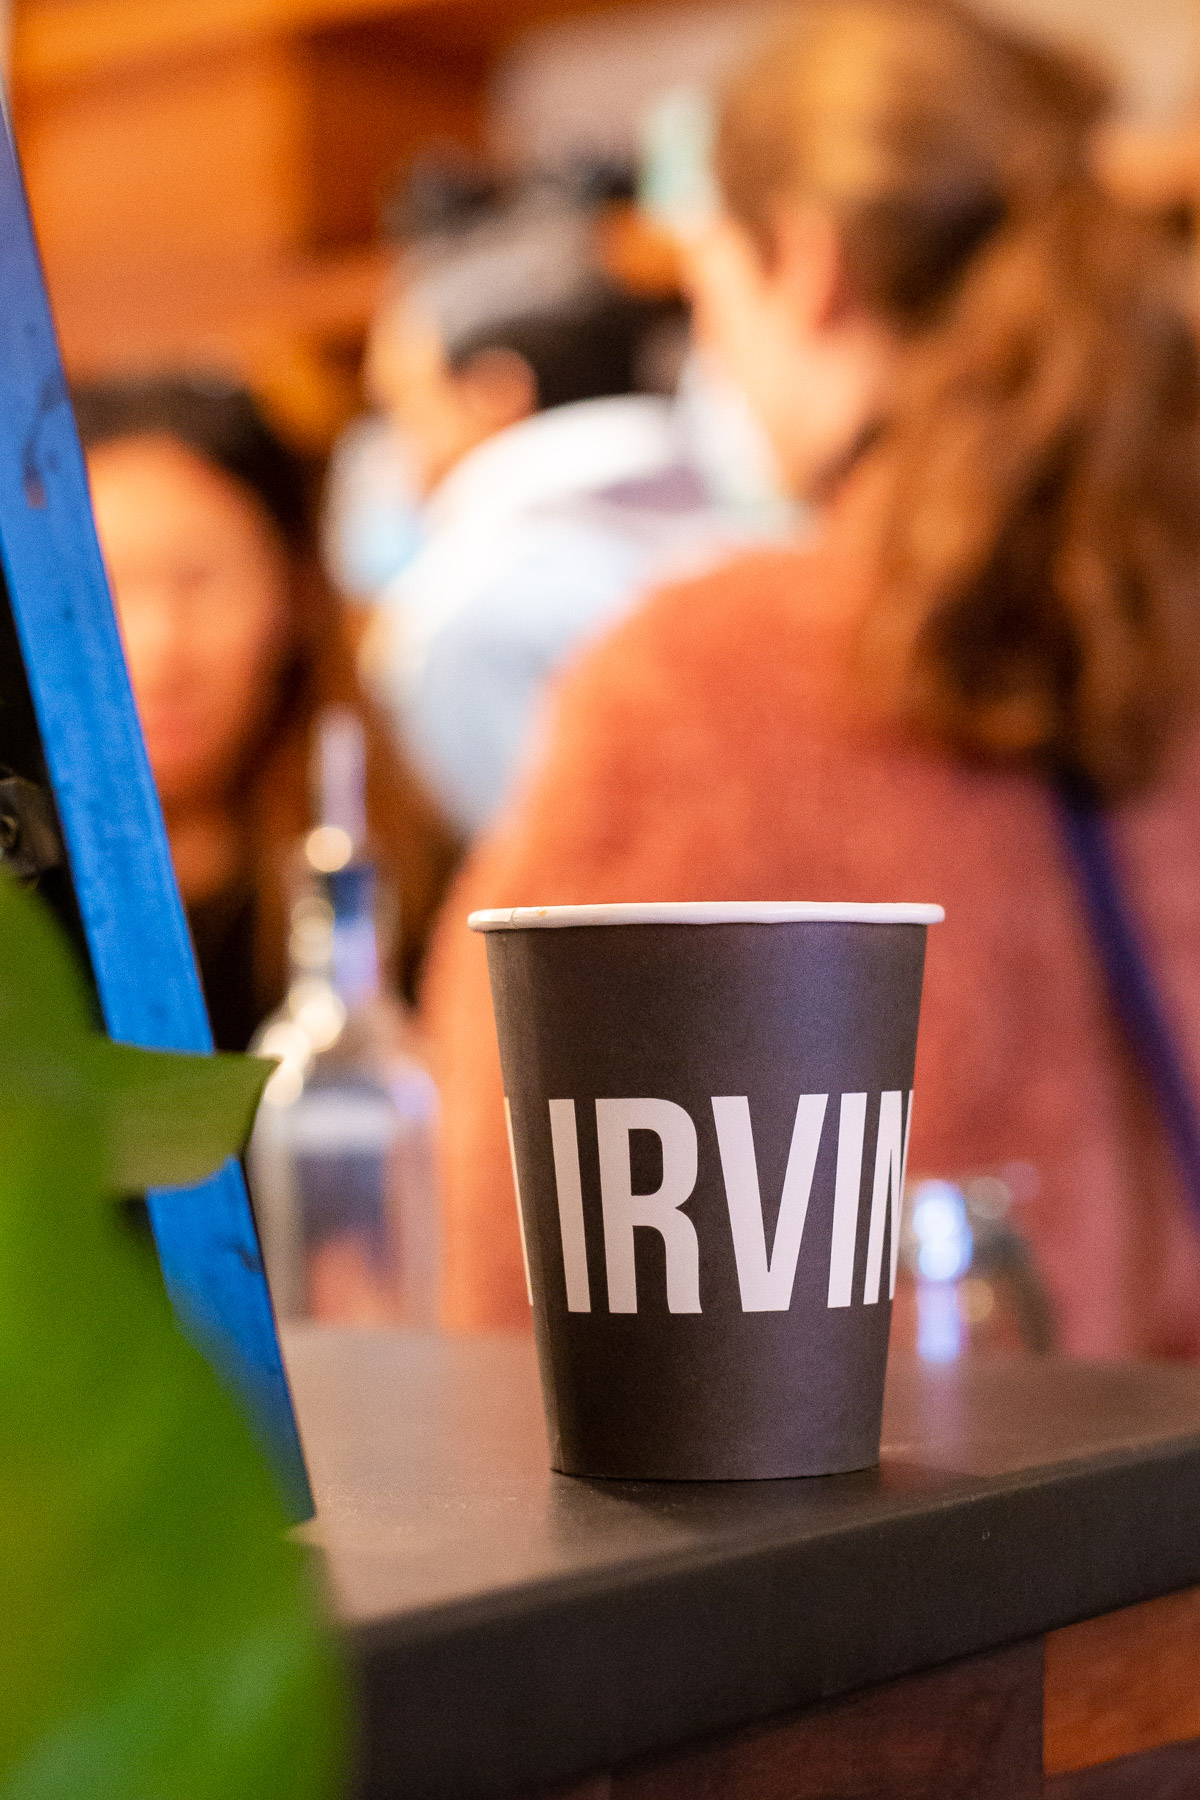 Irving Farm
Best cafes to work from NYC